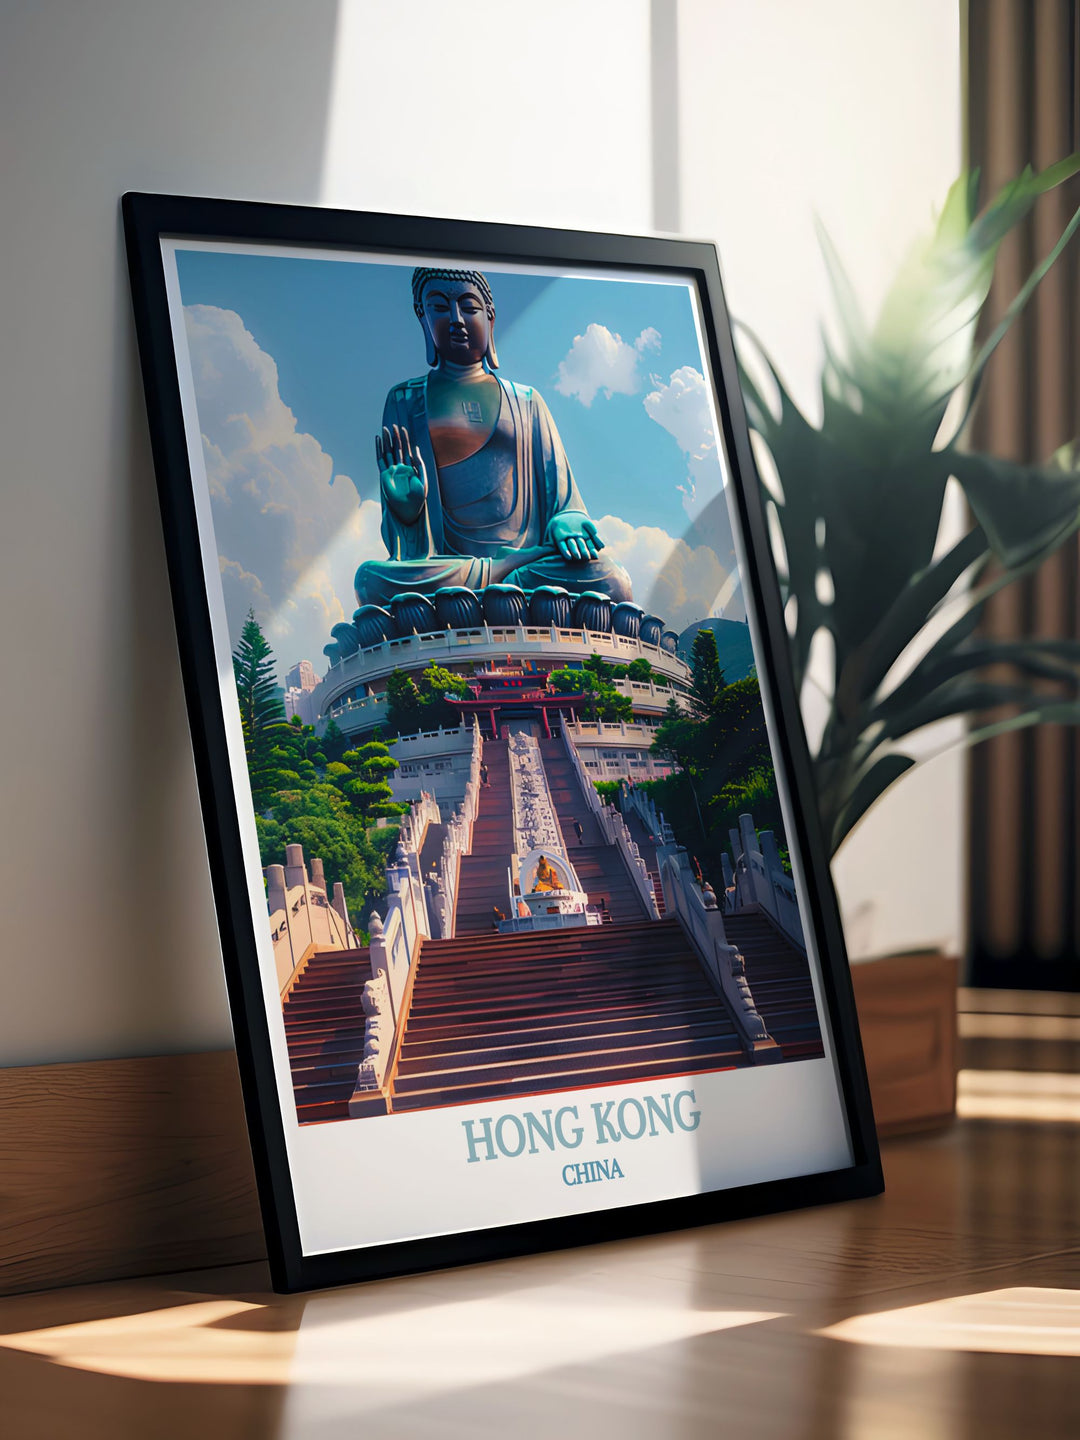 Showcasing the rich cultural heritage of Hong Kong, this poster highlights historic temples, bustling markets, and traditional festivals. Perfect for history buffs, this artwork offers a glimpse into the diverse culture of Hong Kong.